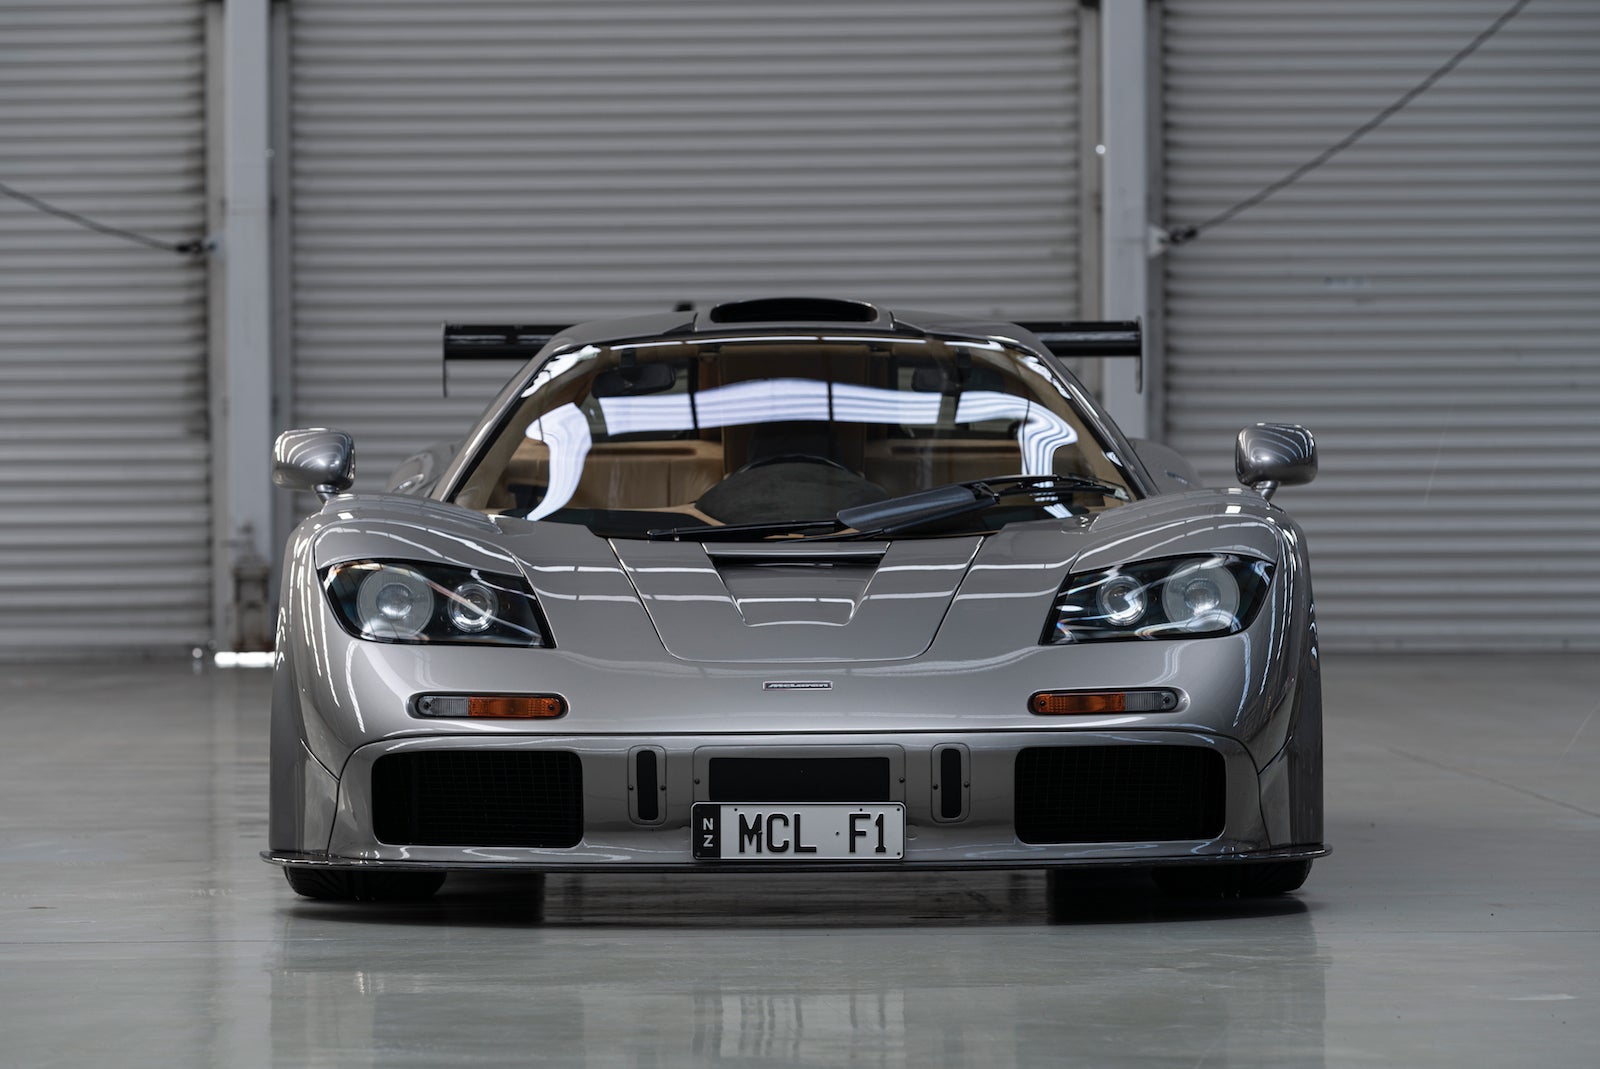 One Of Two Road Legal Mclaren F1 Lm Spec Headed To Auction Could Fetch 23m